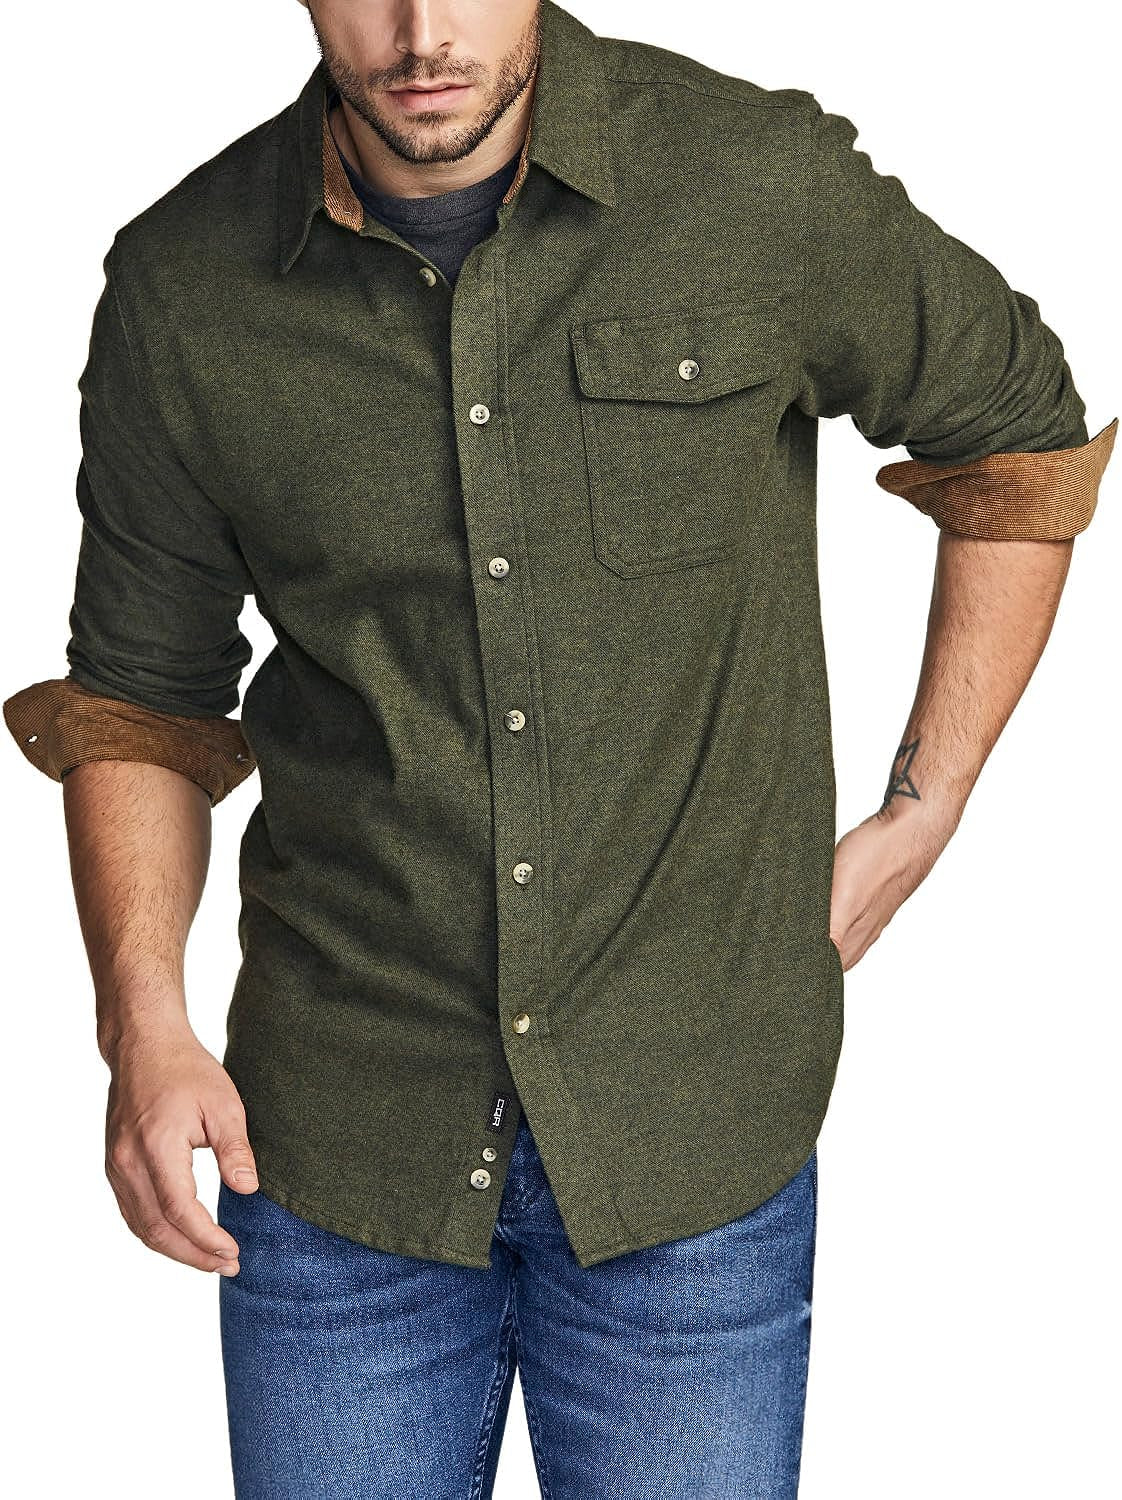 Men'S All Cotton Flannel Shirt, Long Sleeve Casual Button up Plaid Shirt, Brushed Soft Outdoor Shirts